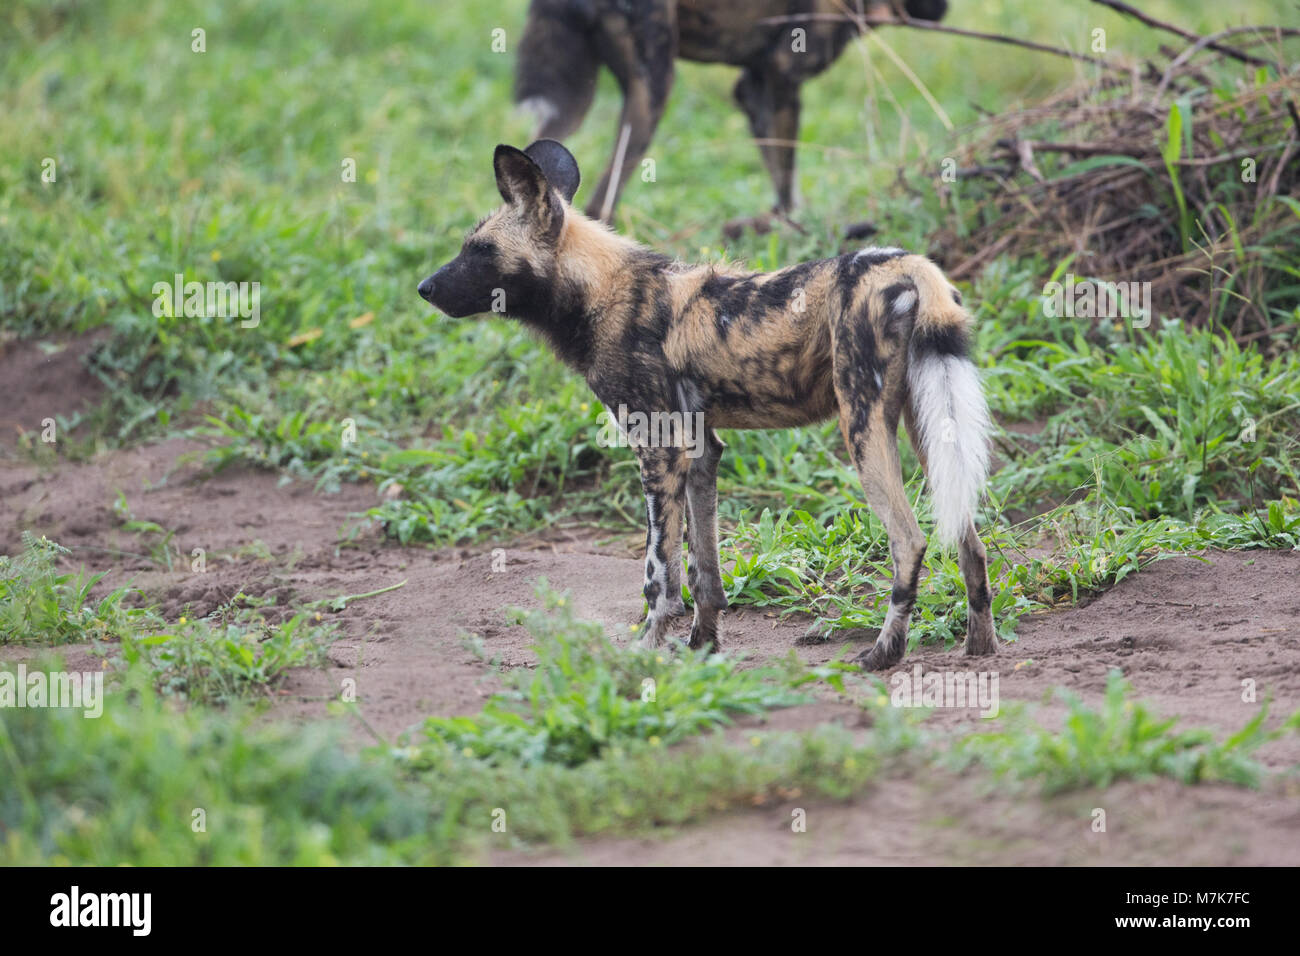 African Hunting Dog, or African Wild Dog or African Painted Dog or Painted Wolf (Lycaon pictus). Senses of sight, smell and hearing alert. Stock Photo